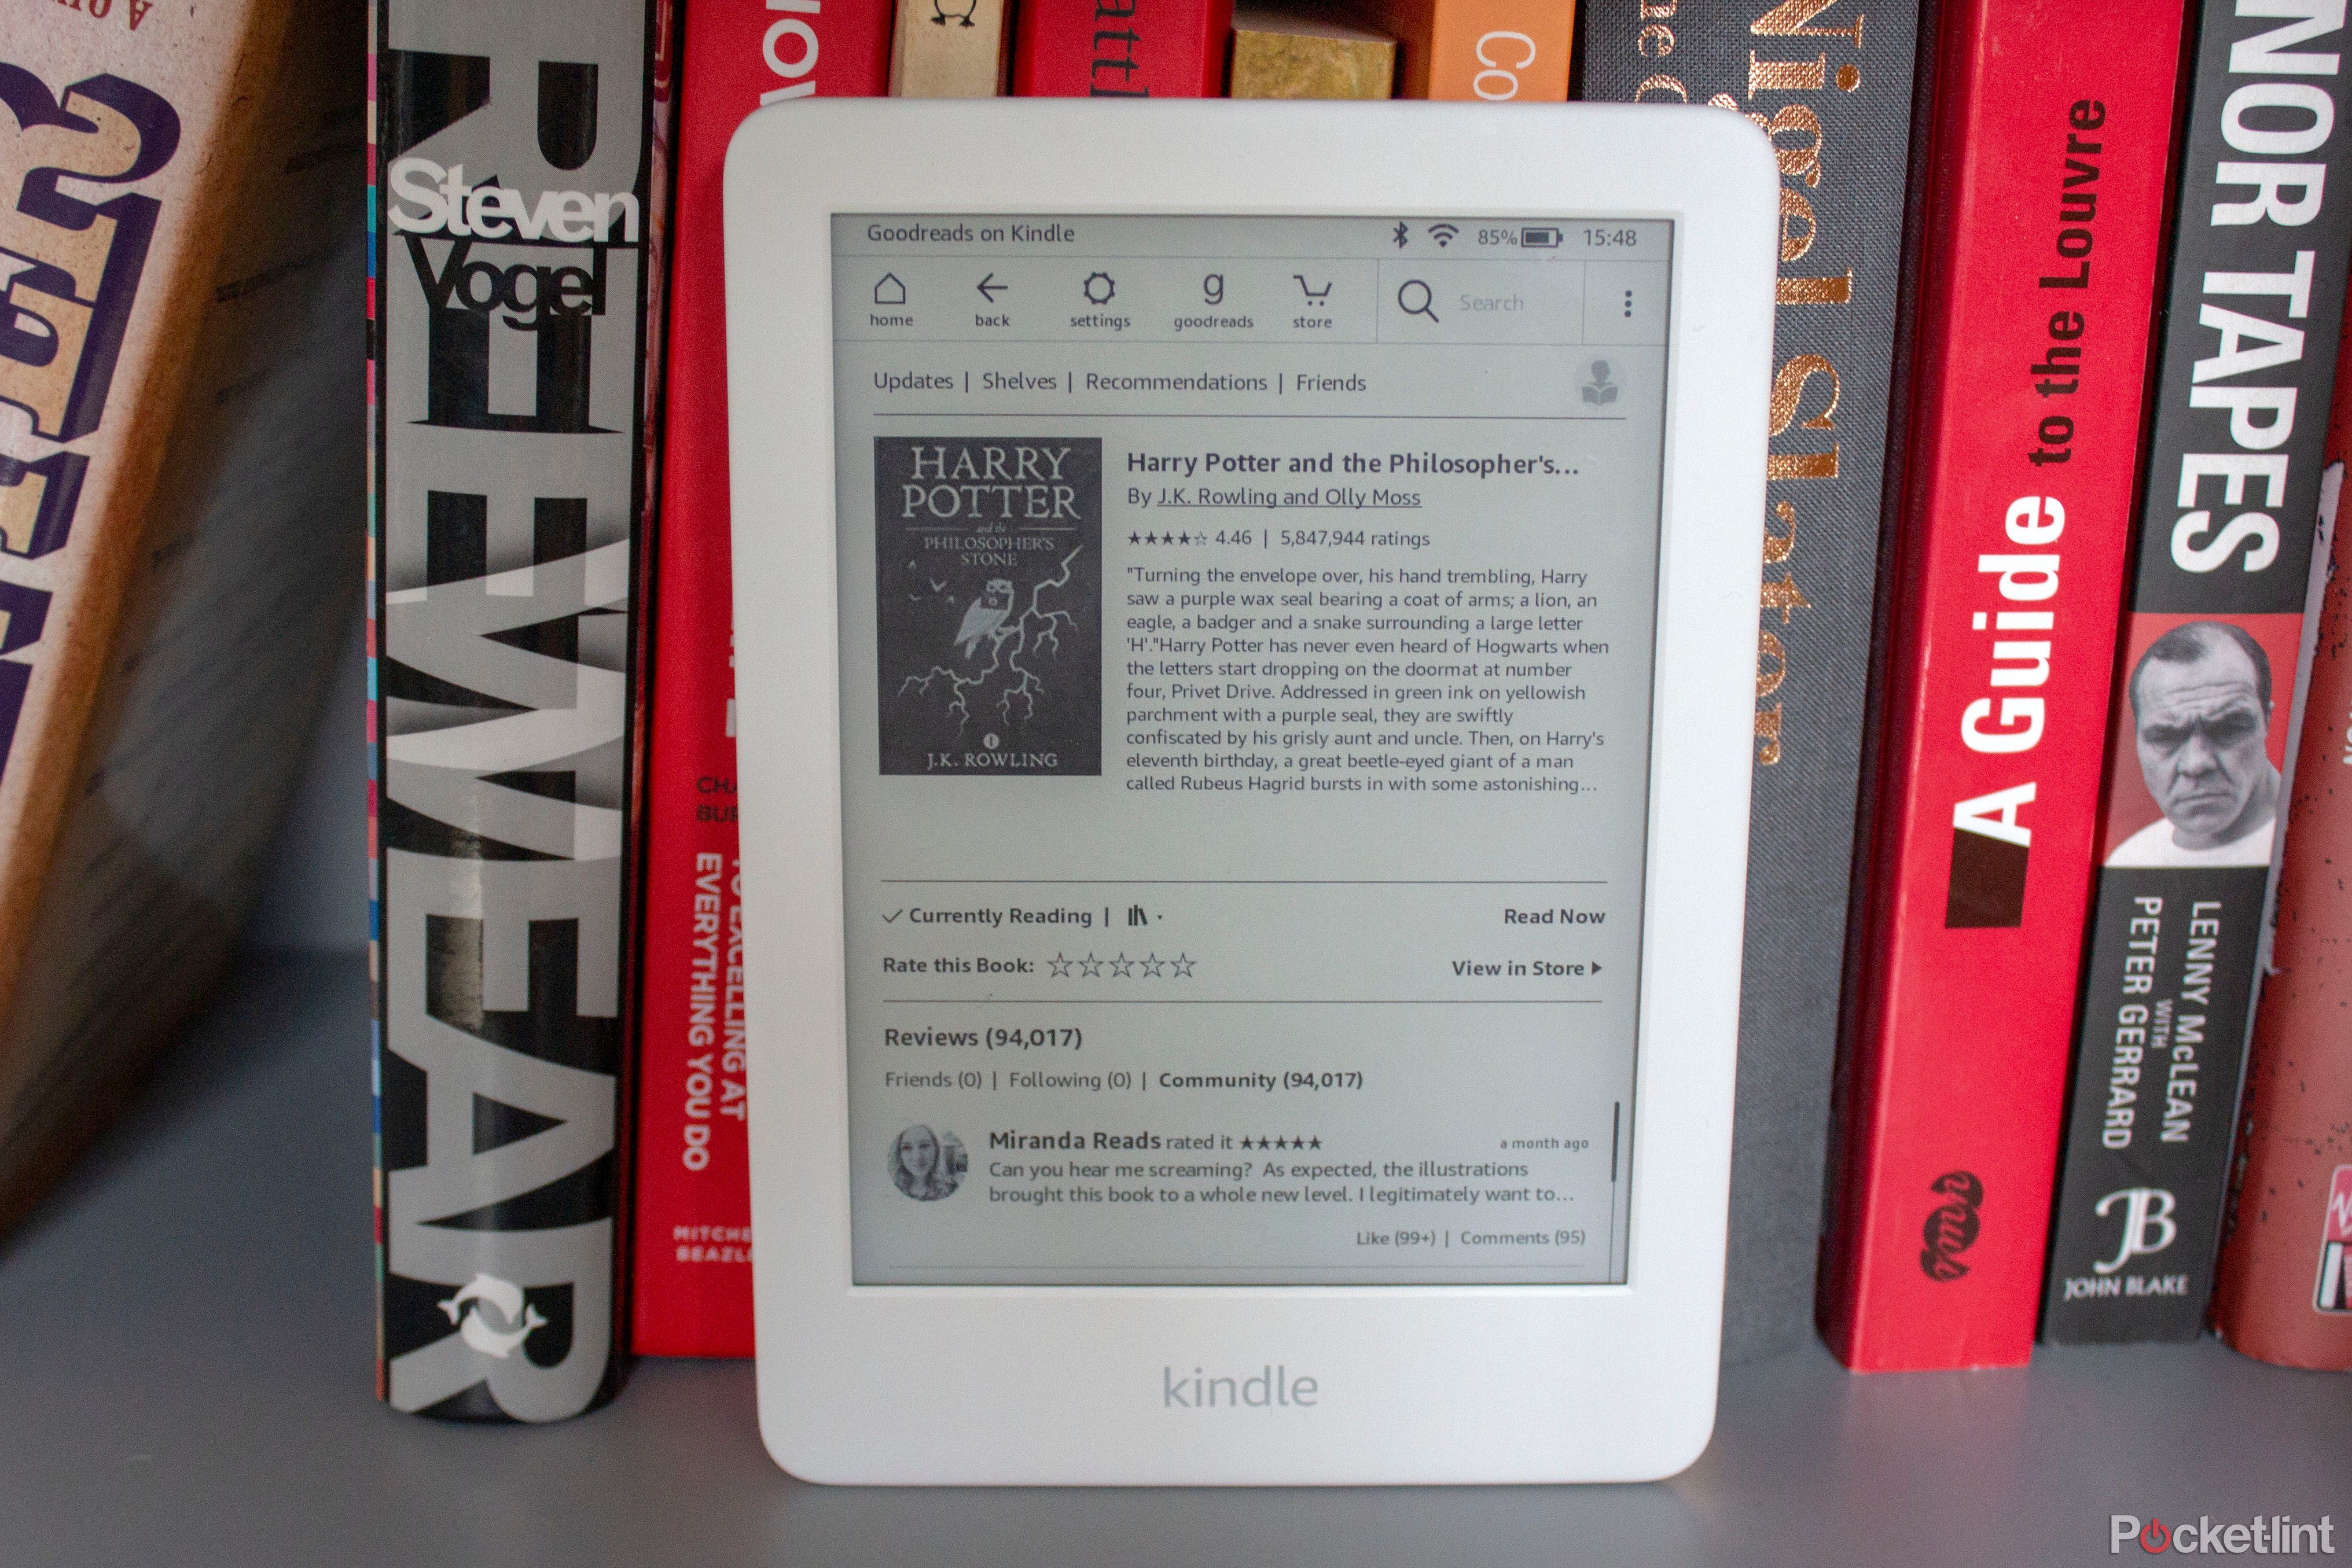 Amazon Kindle 2019 review images image 4